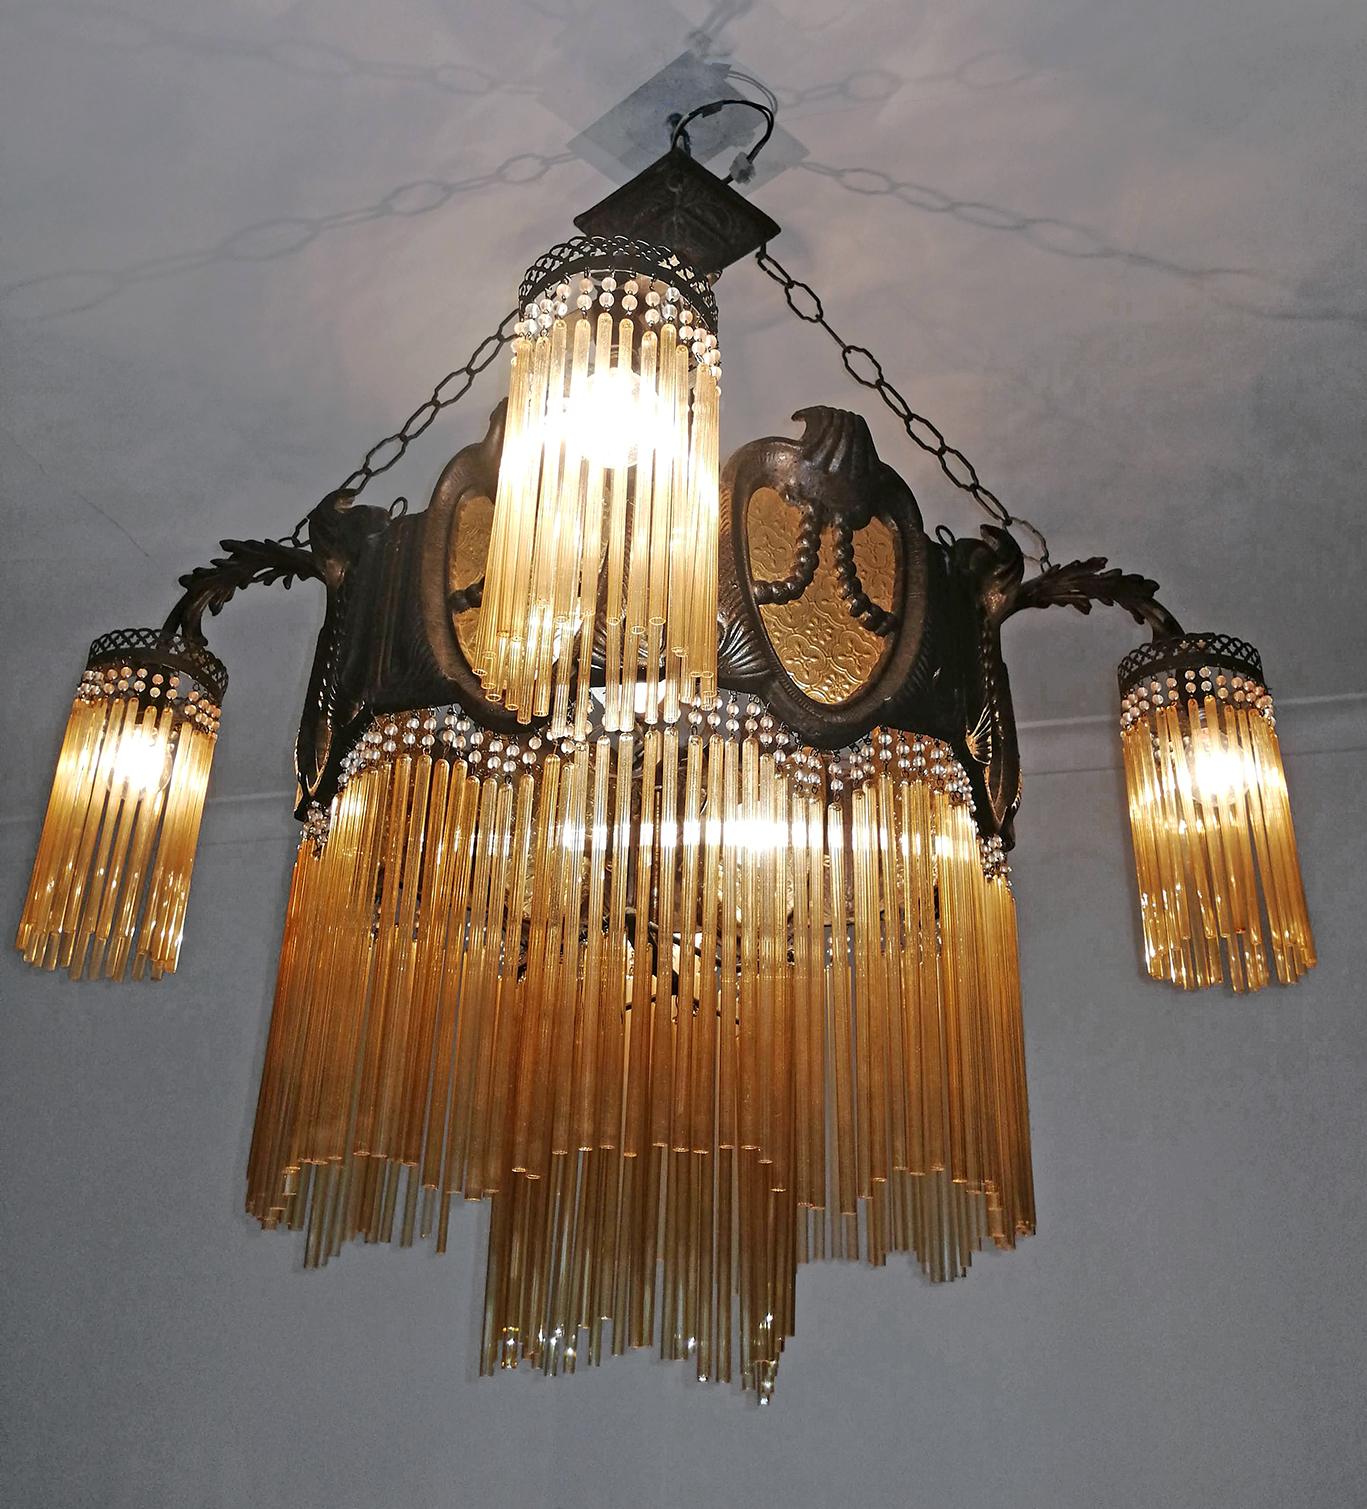 Large French Art Nouveau and Art Deco Amber Glass Straws Bronze Chandelier c1900 In Good Condition For Sale In Coimbra, PT